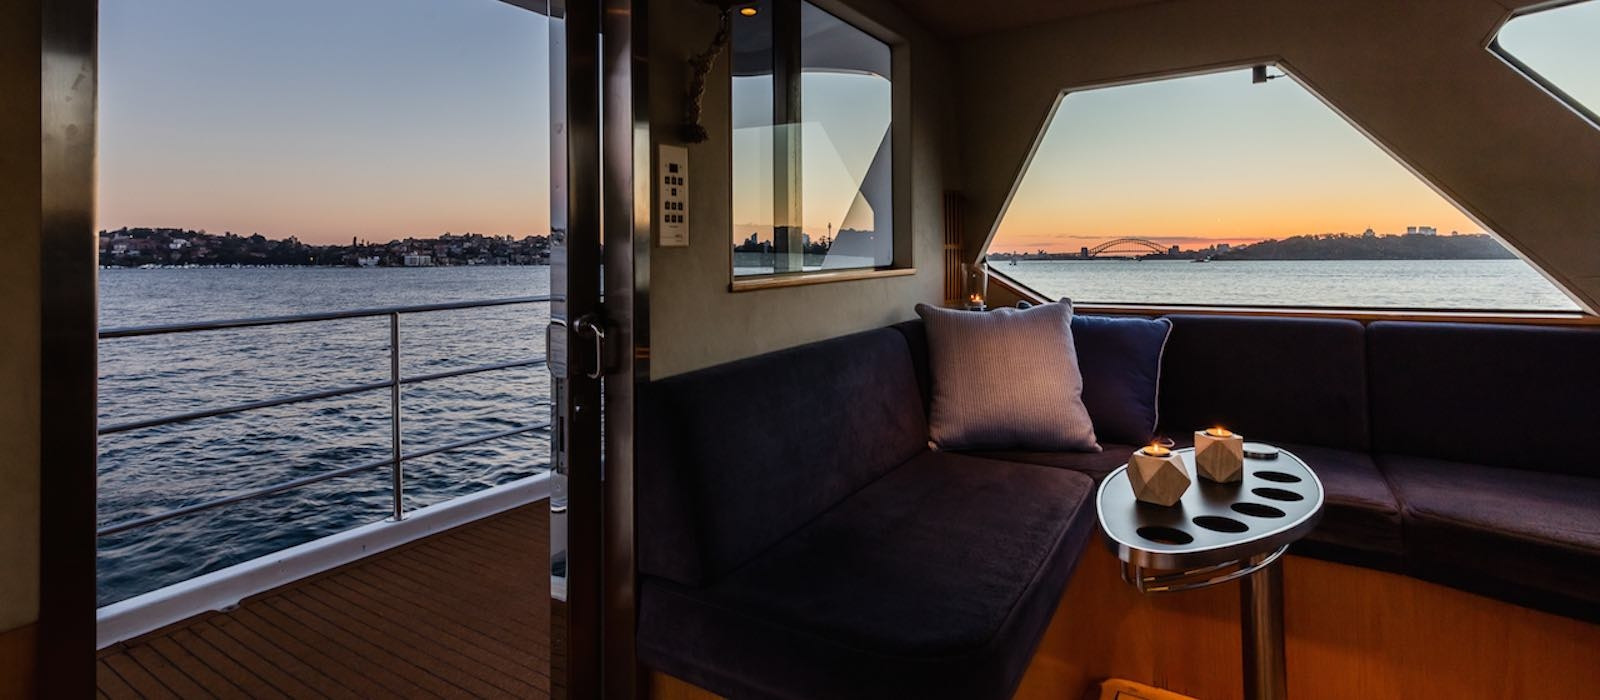 Sunset views from State of The Art luxury boat hire